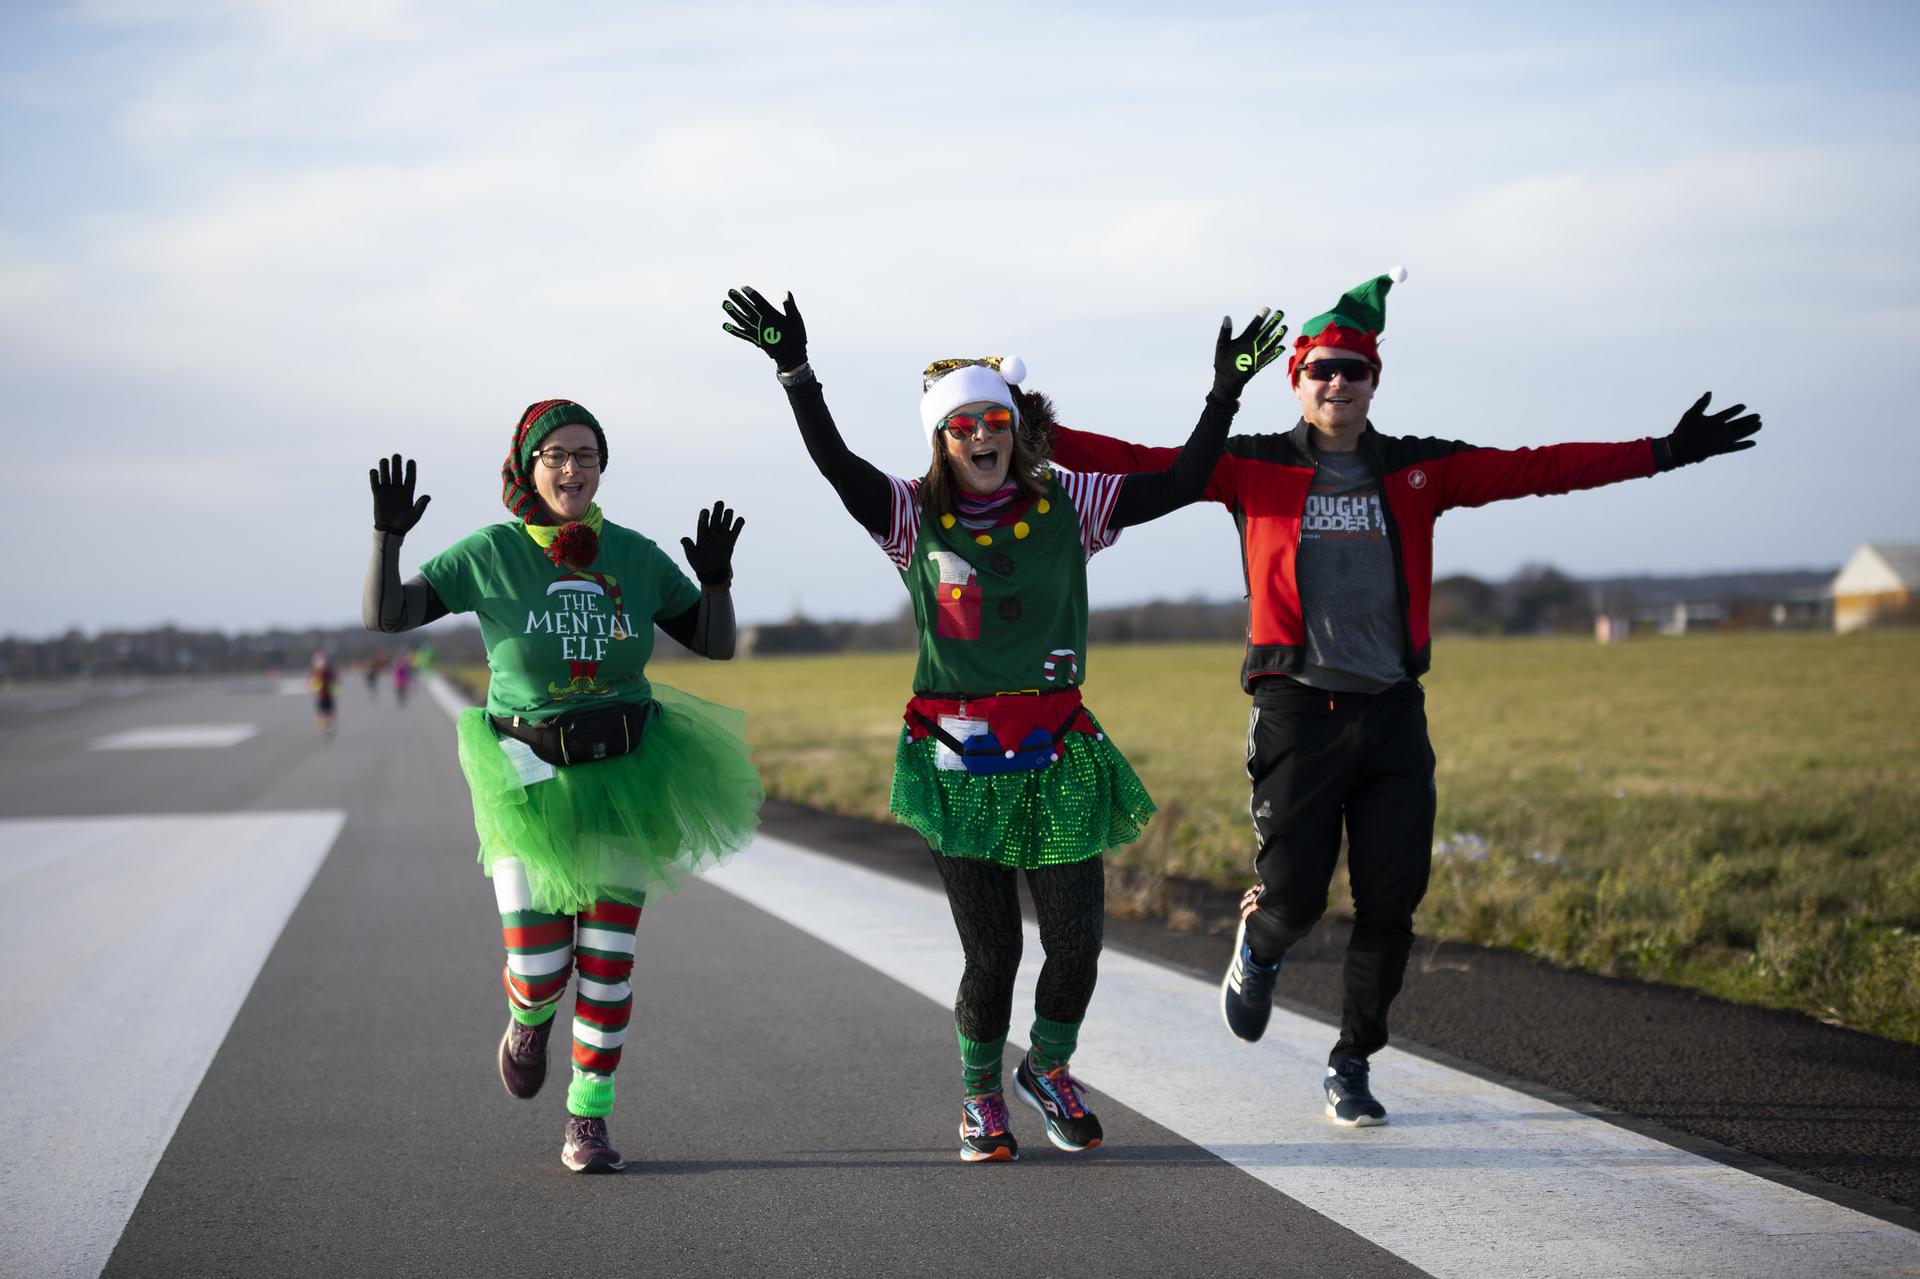 In December we hosted a ‘Mental Elf’ event on the runway and with over 50 members of the public joining airport employees in an attempt to complete 54 miles - the SECE Mind boundary around the South East and central Essex area – participants achieved a staggering 393.16 miles and over £15K for the charity!